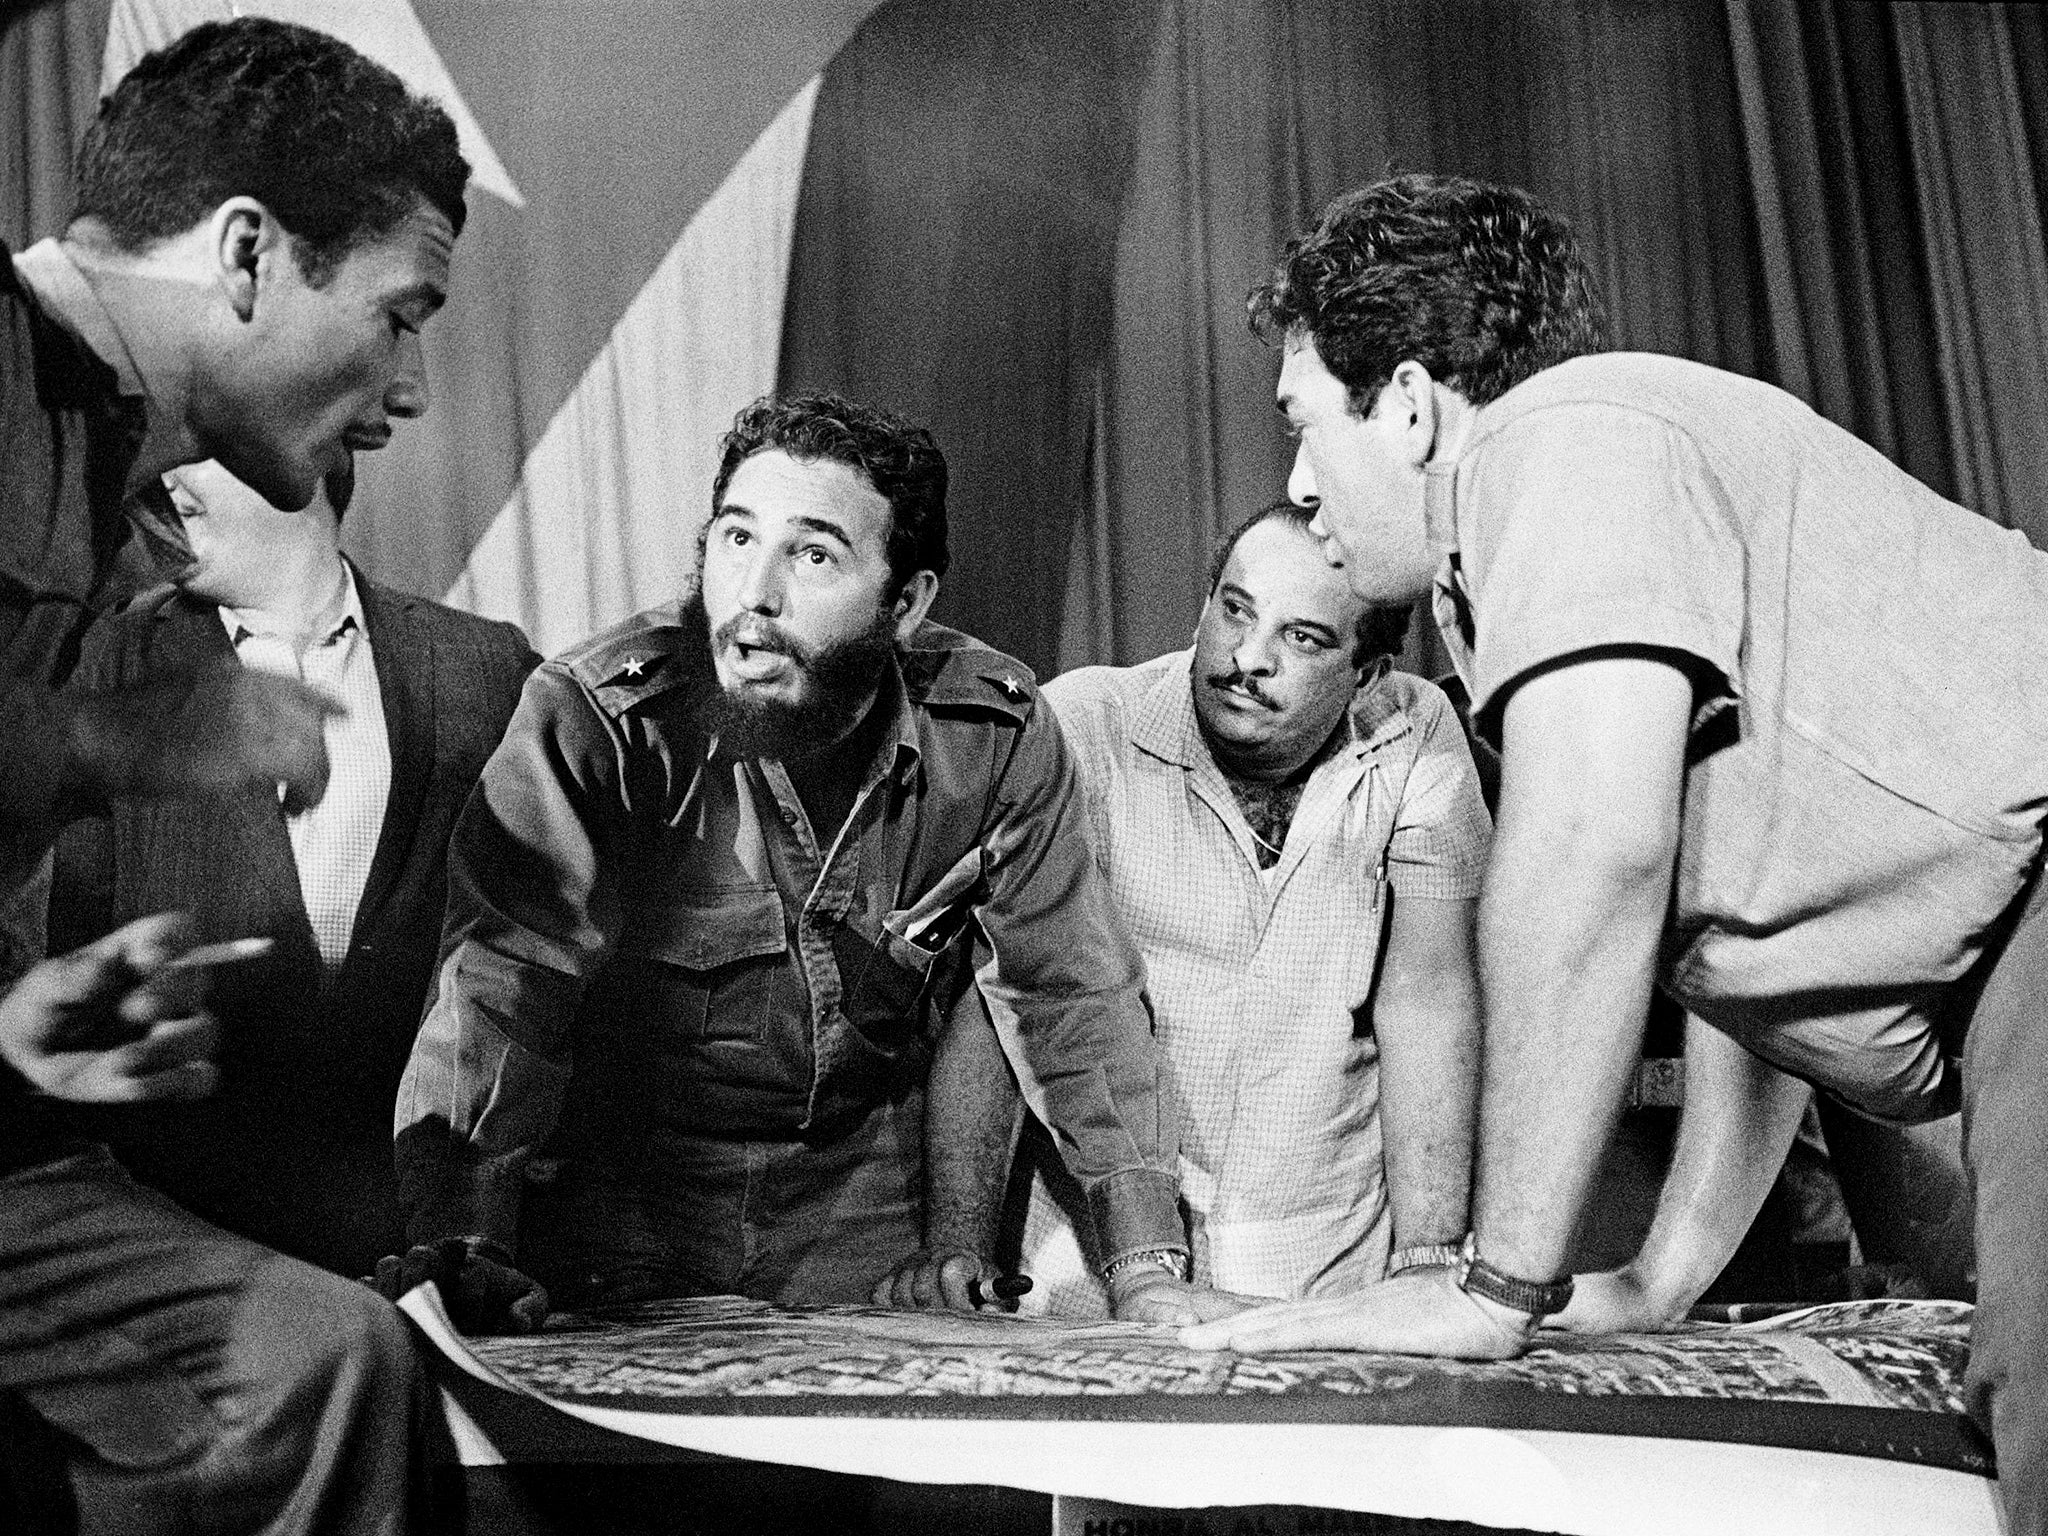 Castro with members of his government discussing strategy concerning the 'Bay of Pigs' invasion